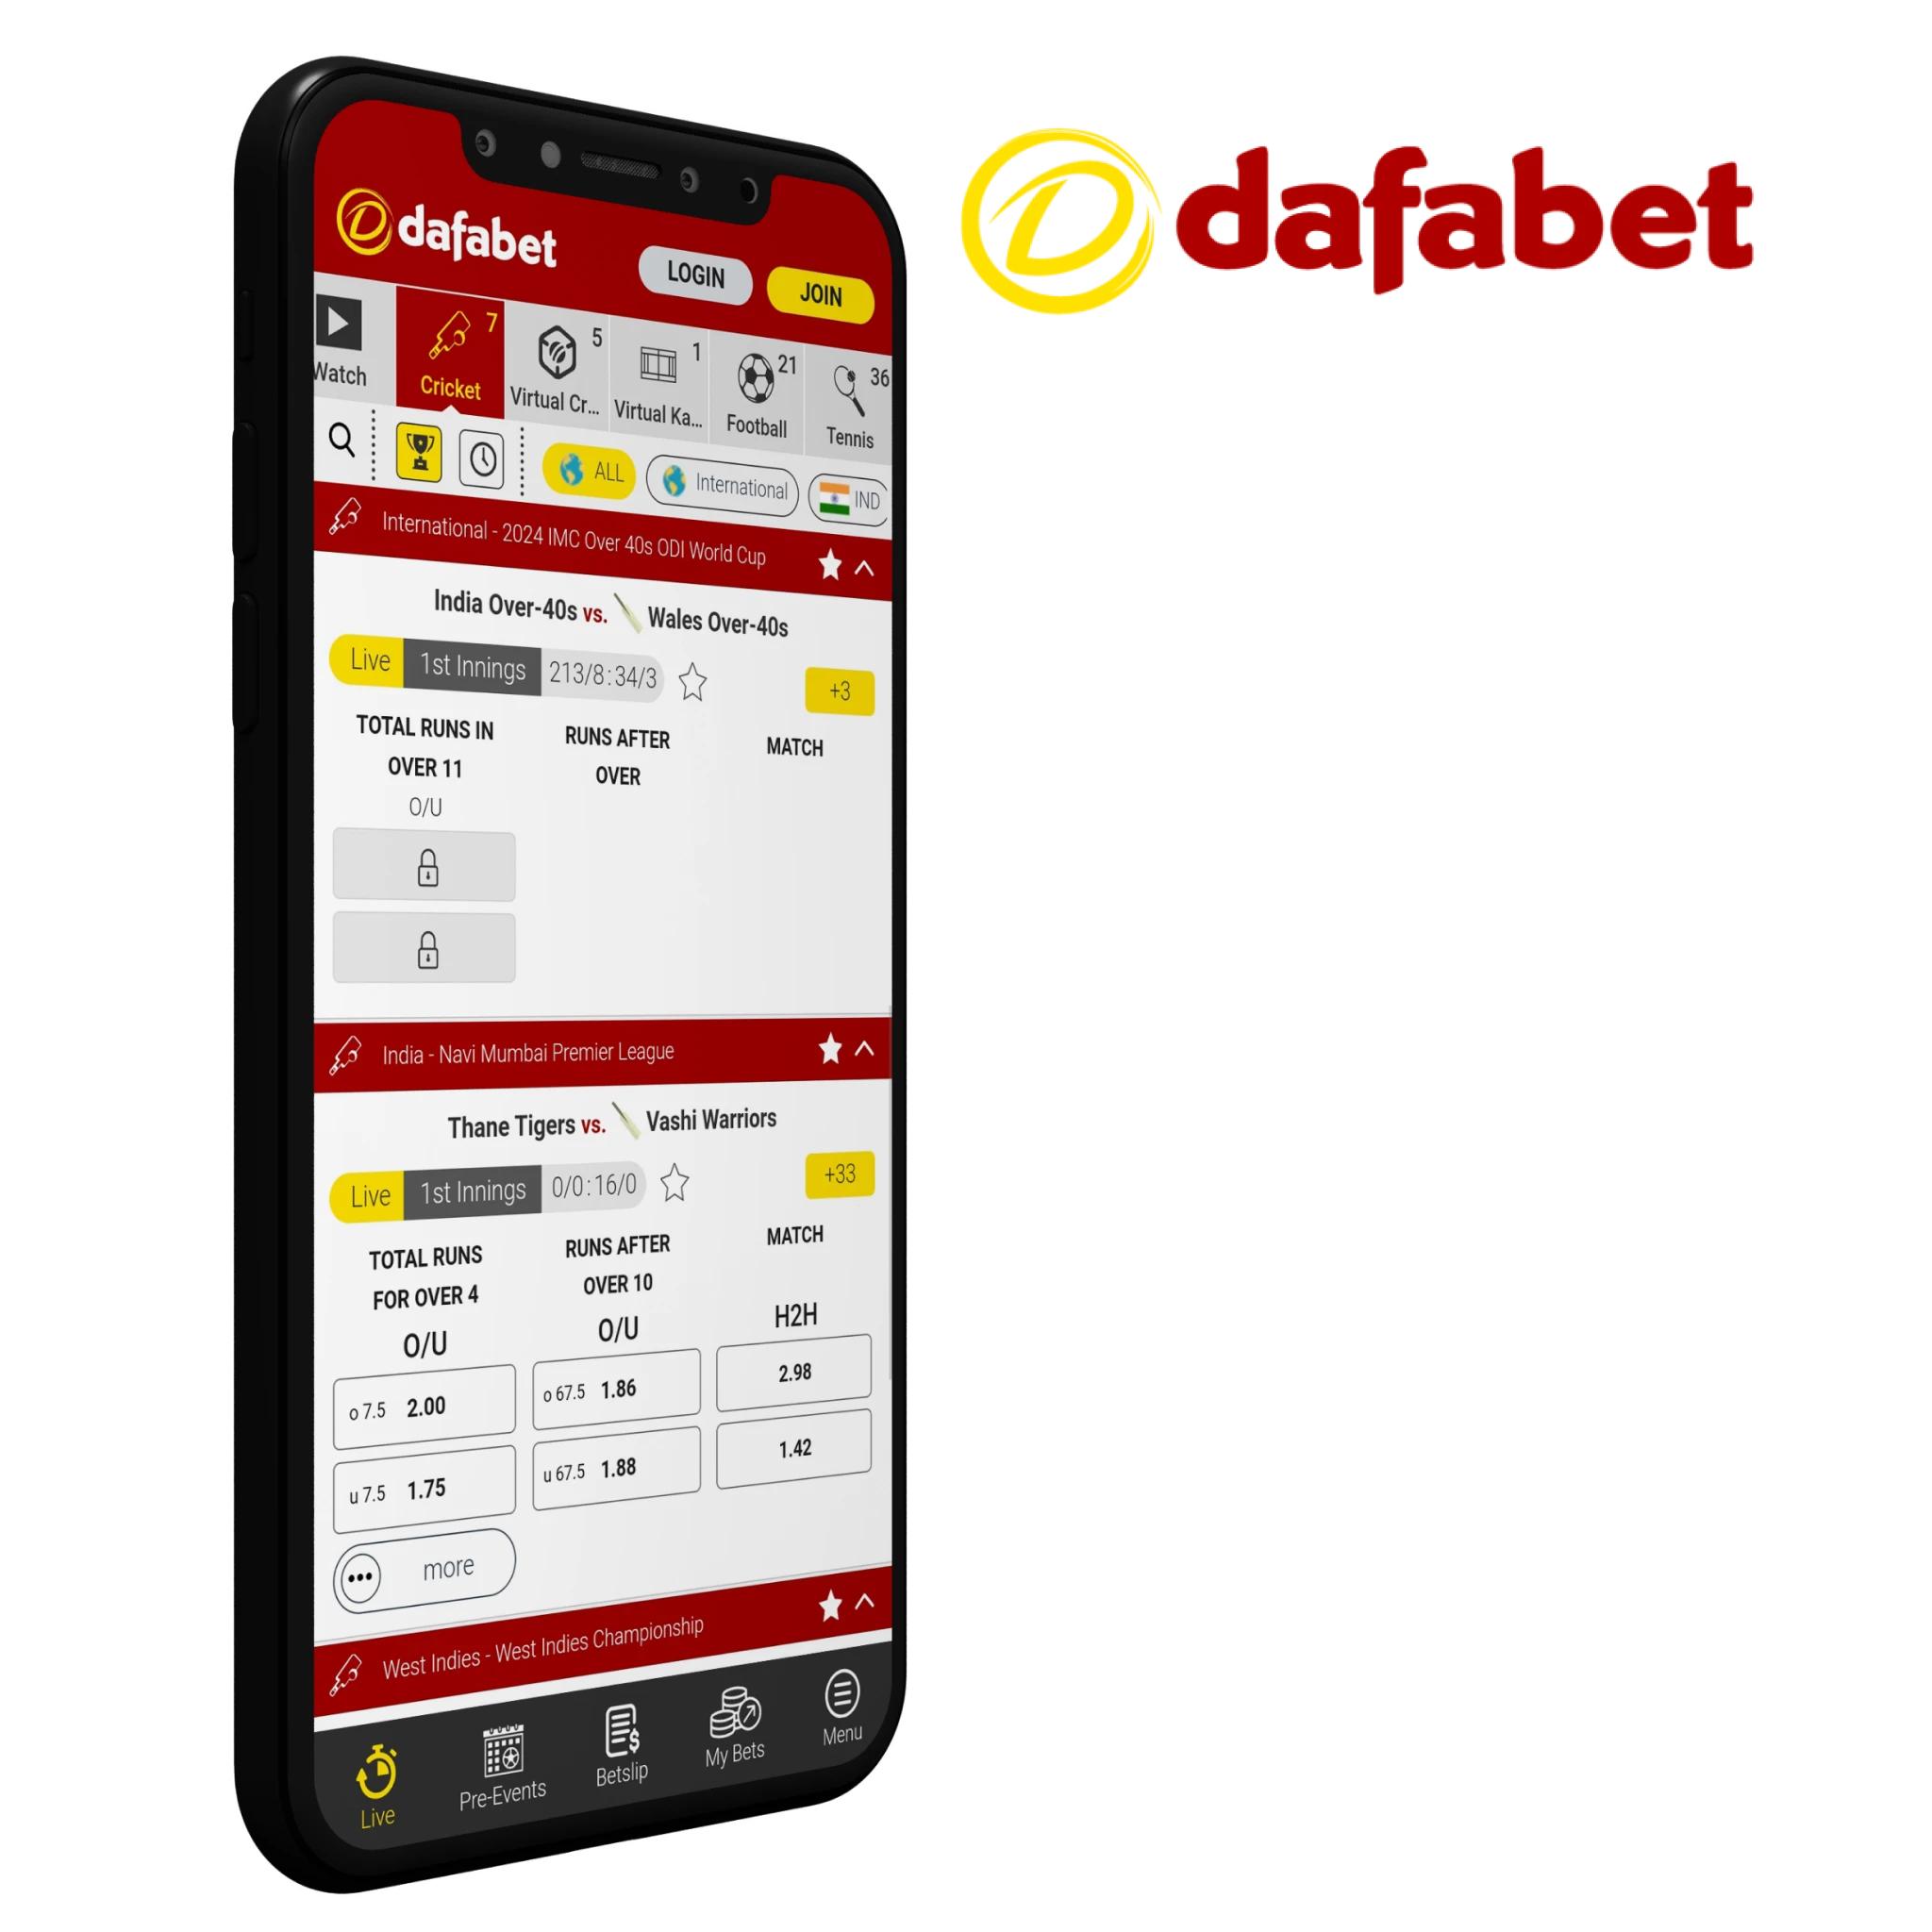 If you download and install the Dafabet mobile app, you will immediately have full access to one-click betting on any cricket event right from the main menu of your device.